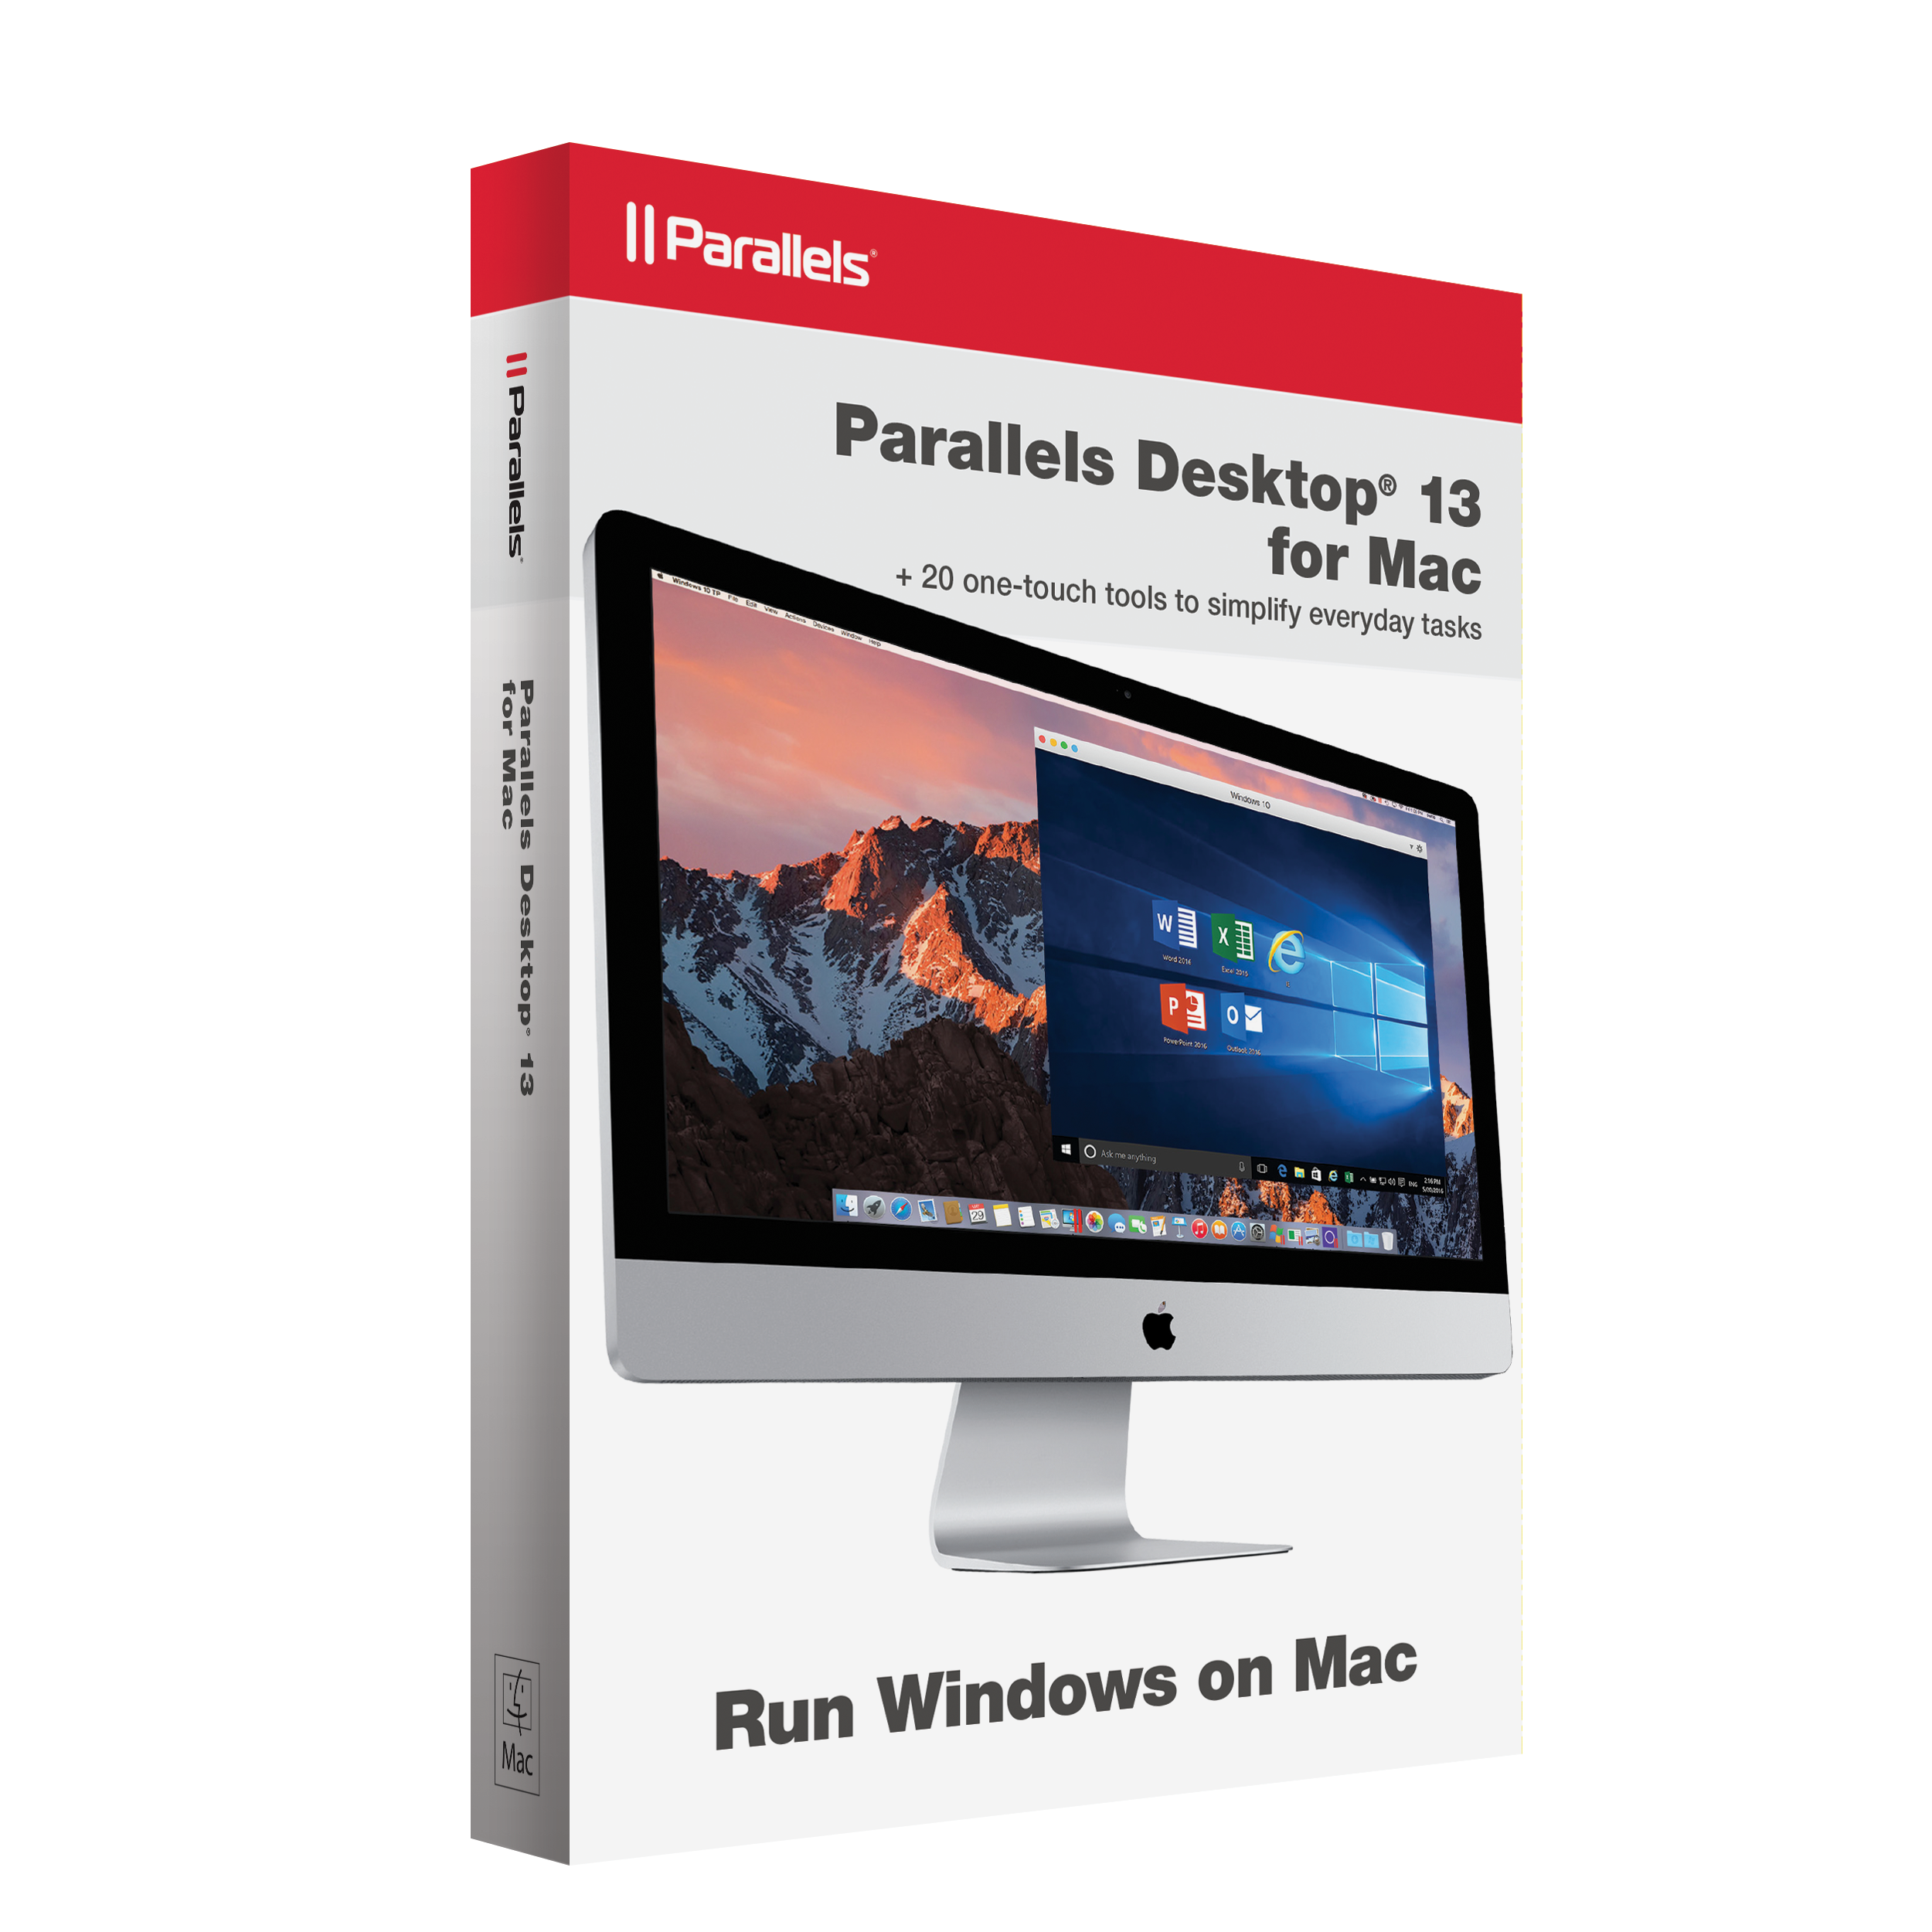 load office 365 on parallels destop for mac